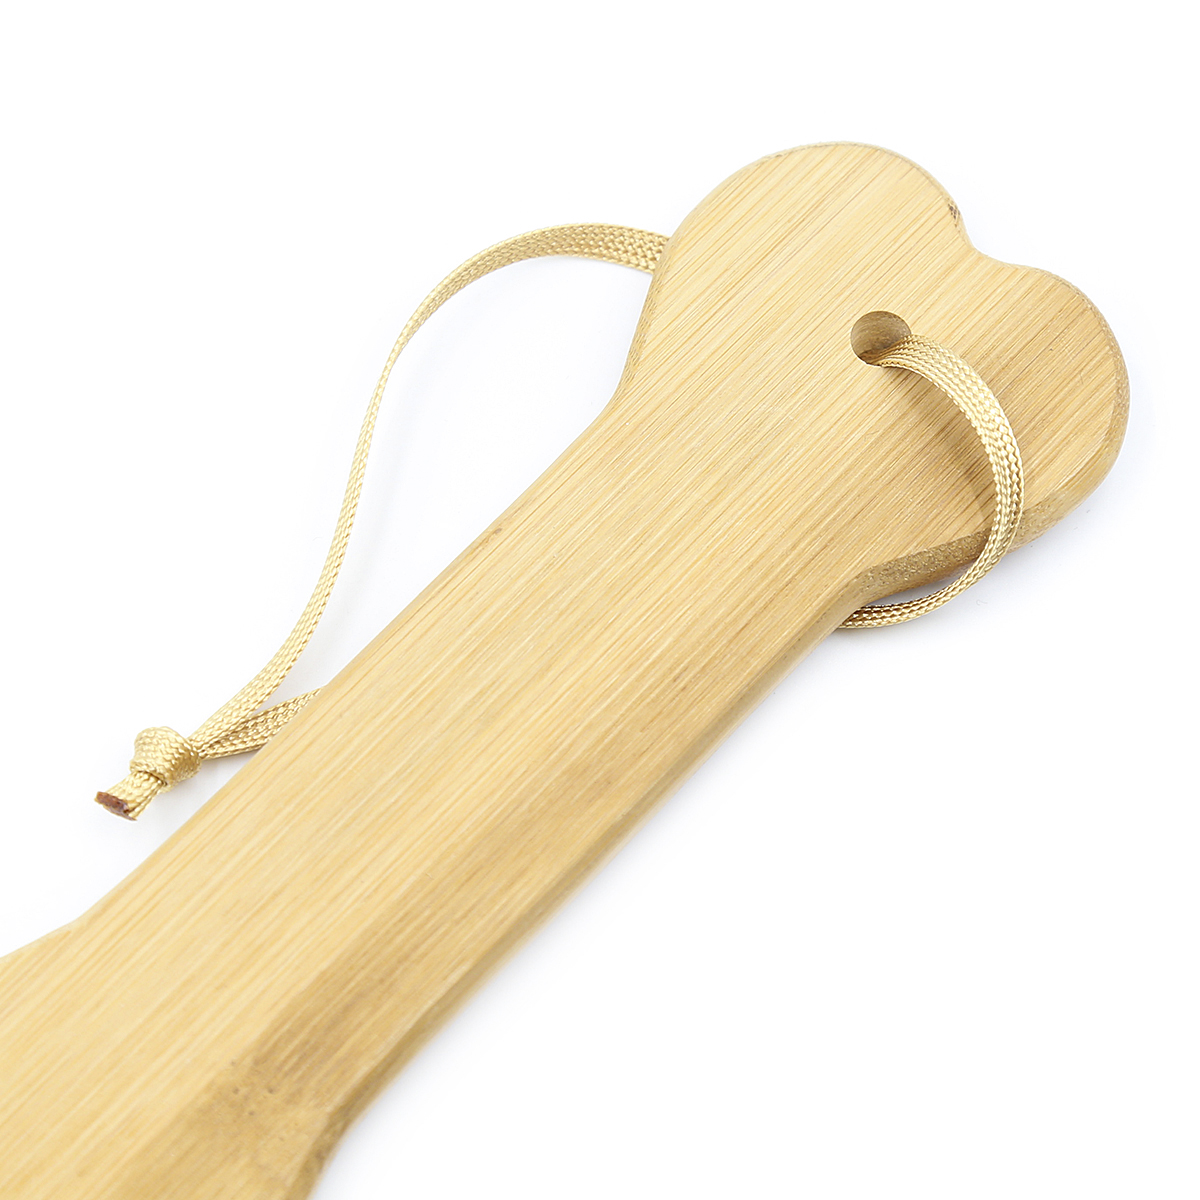 Bamboo-Wooden-Paddle-OPR-321038-4